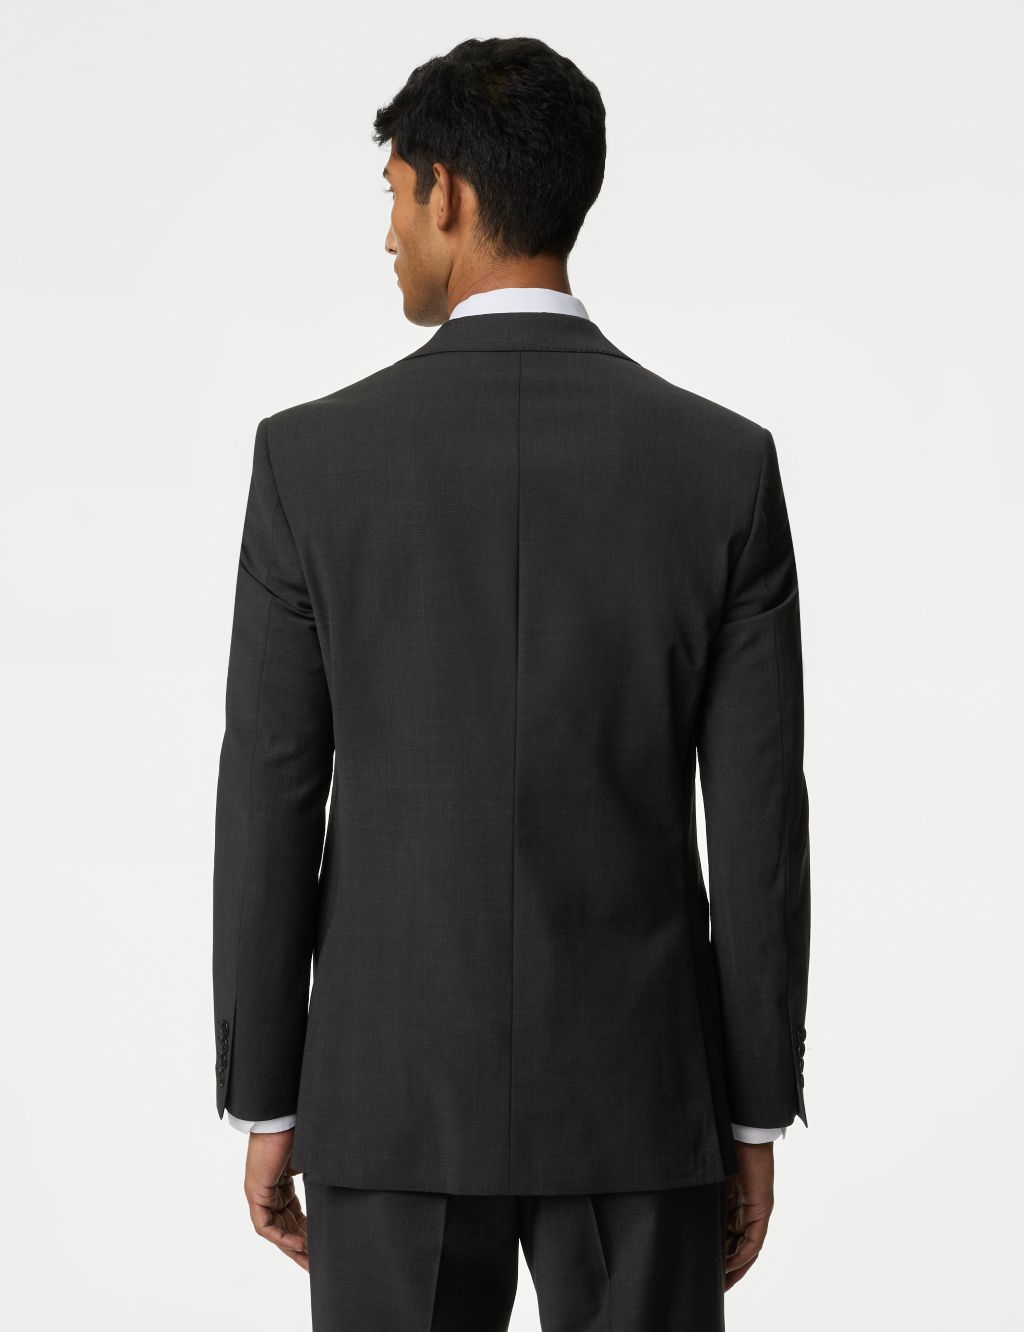 The Ultimate Tailored Fit Suit image 3